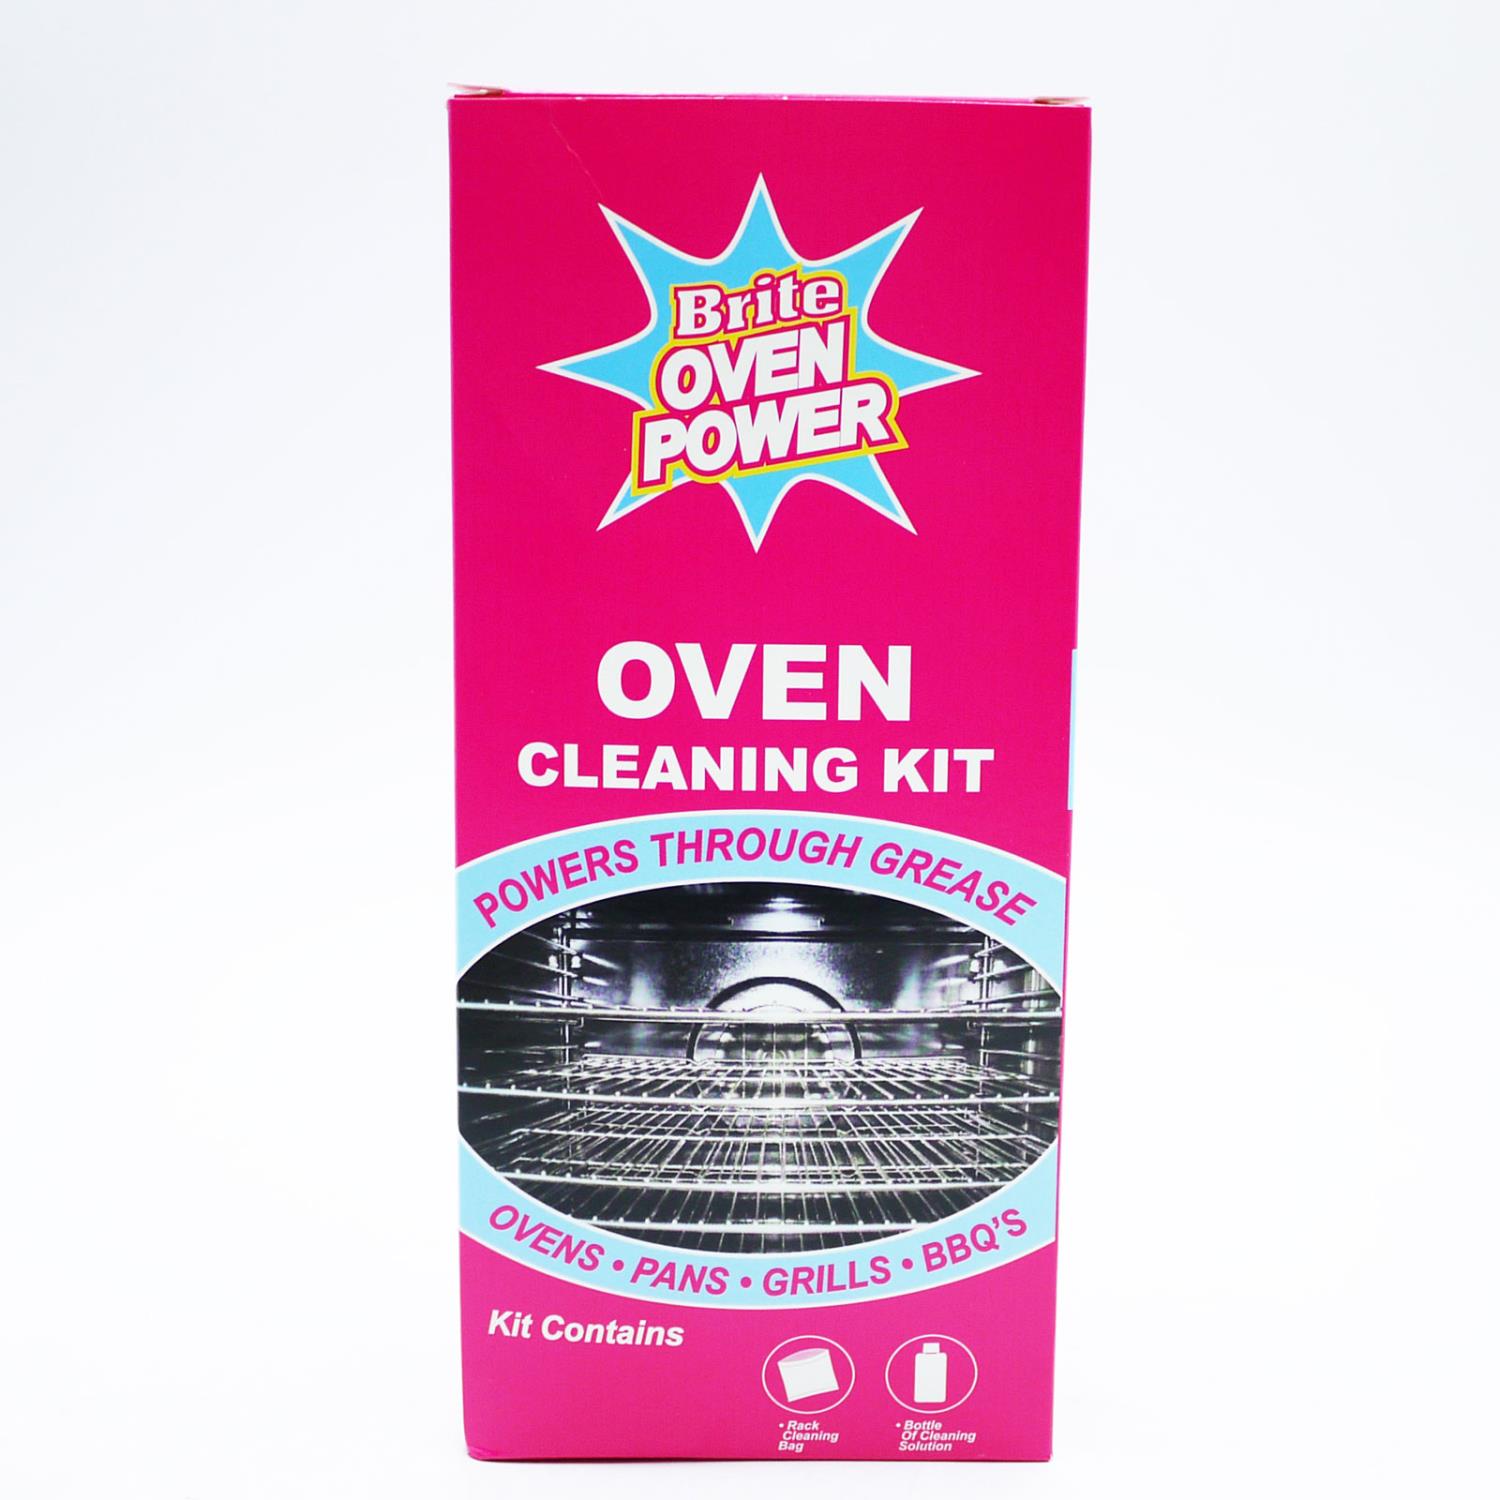 Brite Oven Power Cleaning Kit 330ml